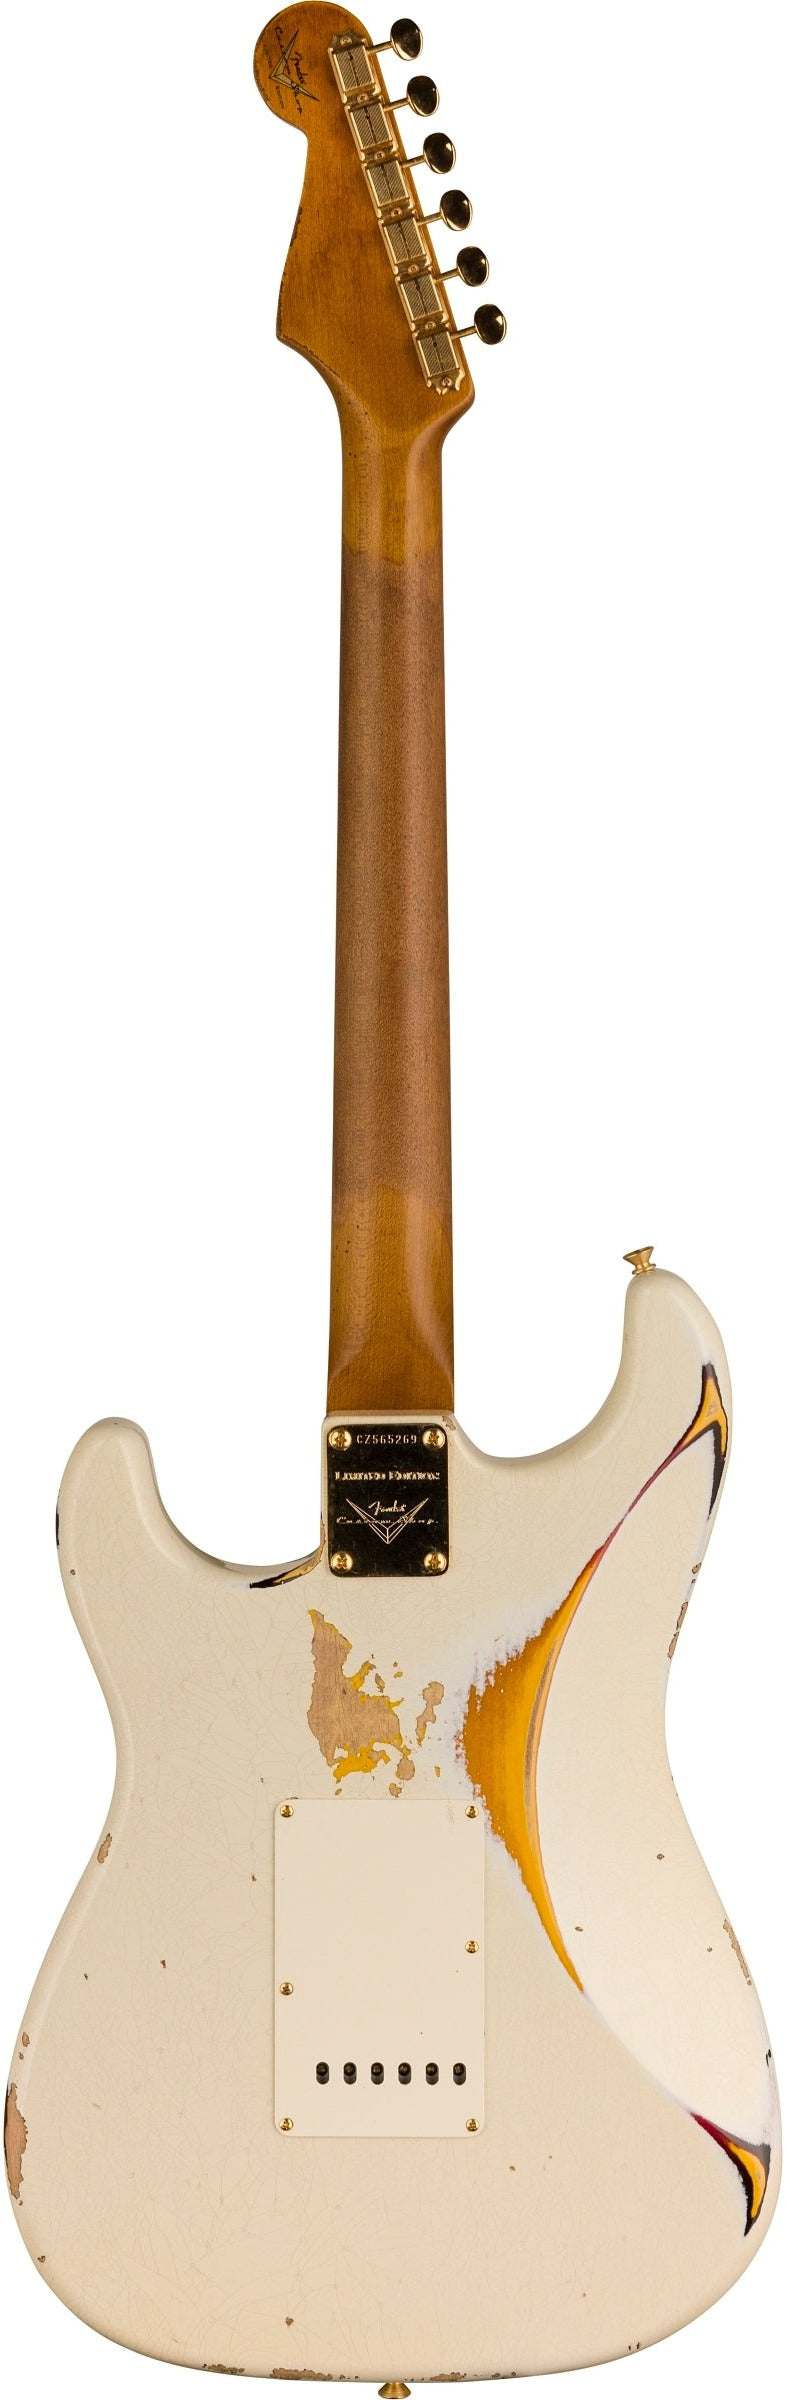 FENDER LIMITED EDITION '62 STRAT® - HEAVY RELIC® WITH GOLD CLOSET CLASSIC HARDWARE, AGED OLYMPIC WHITE OVER 3-COLOR SUNBURST